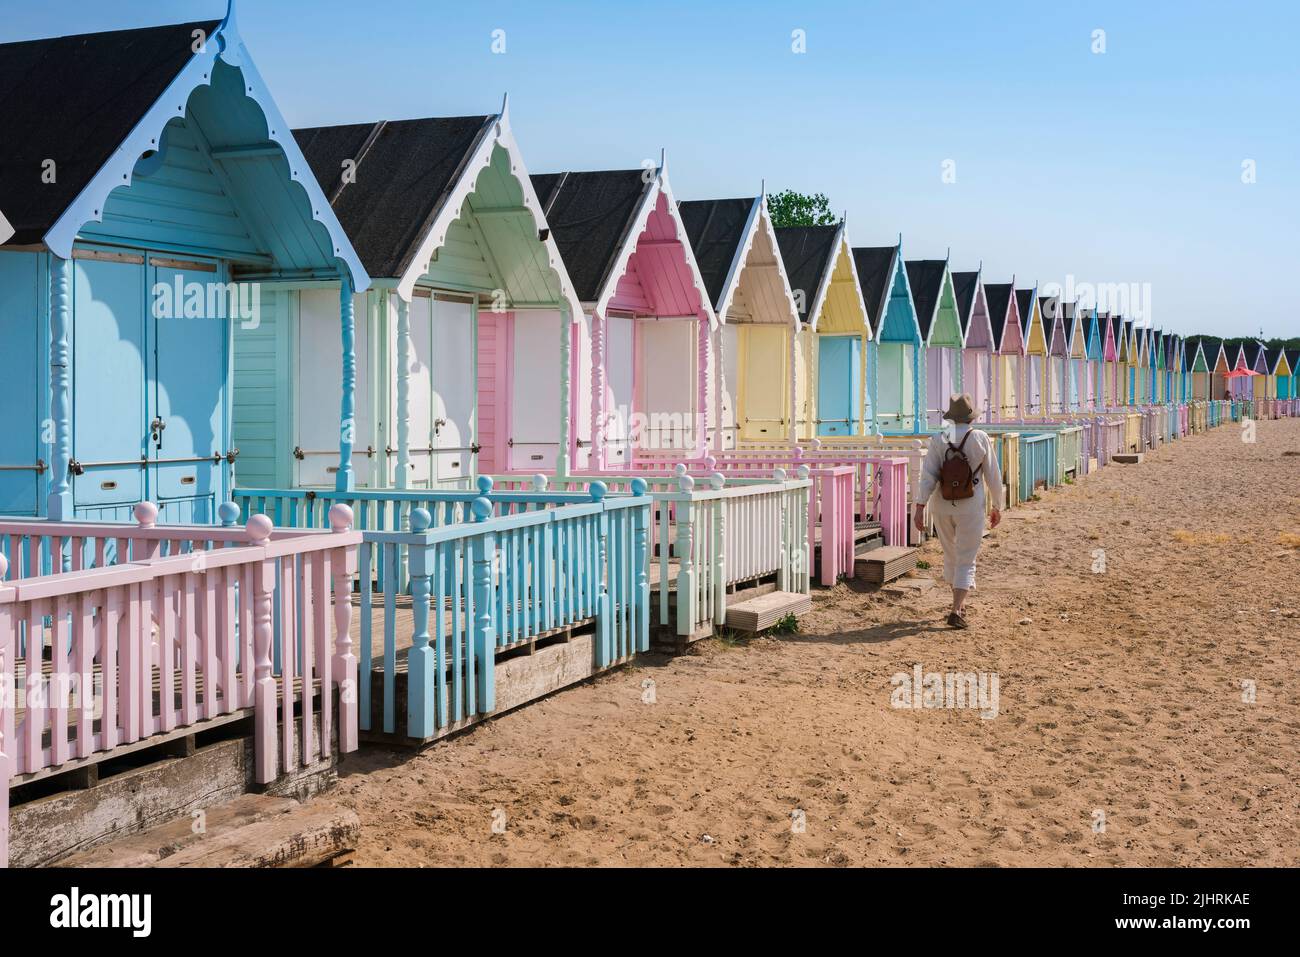 Woman female holiday vacation alone, view in summer of a solo female traveler walking past colorful beach huts on a sandy beach, England, UK Stock Photo